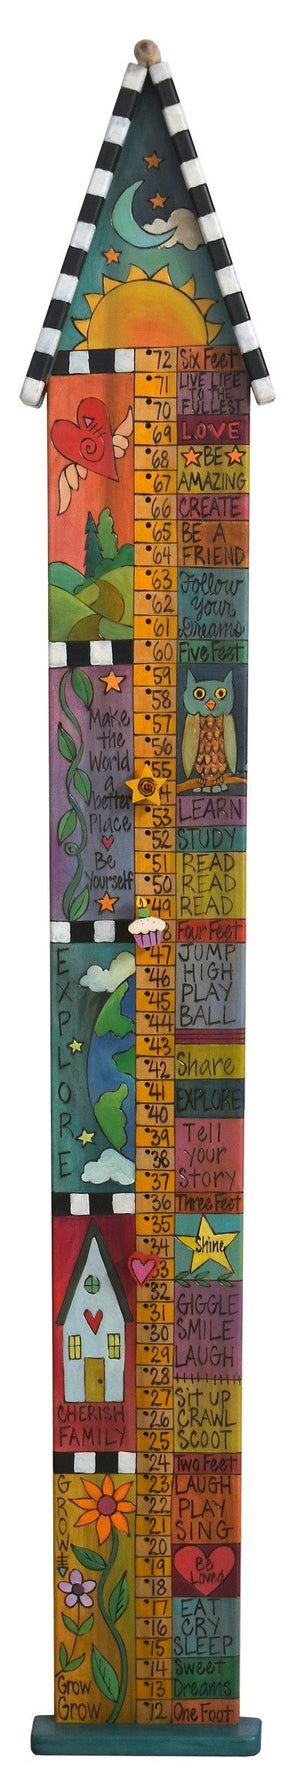 Growth Chart with Pegs –  "Cherish Family" growth chart with pegs with sun and moon motif